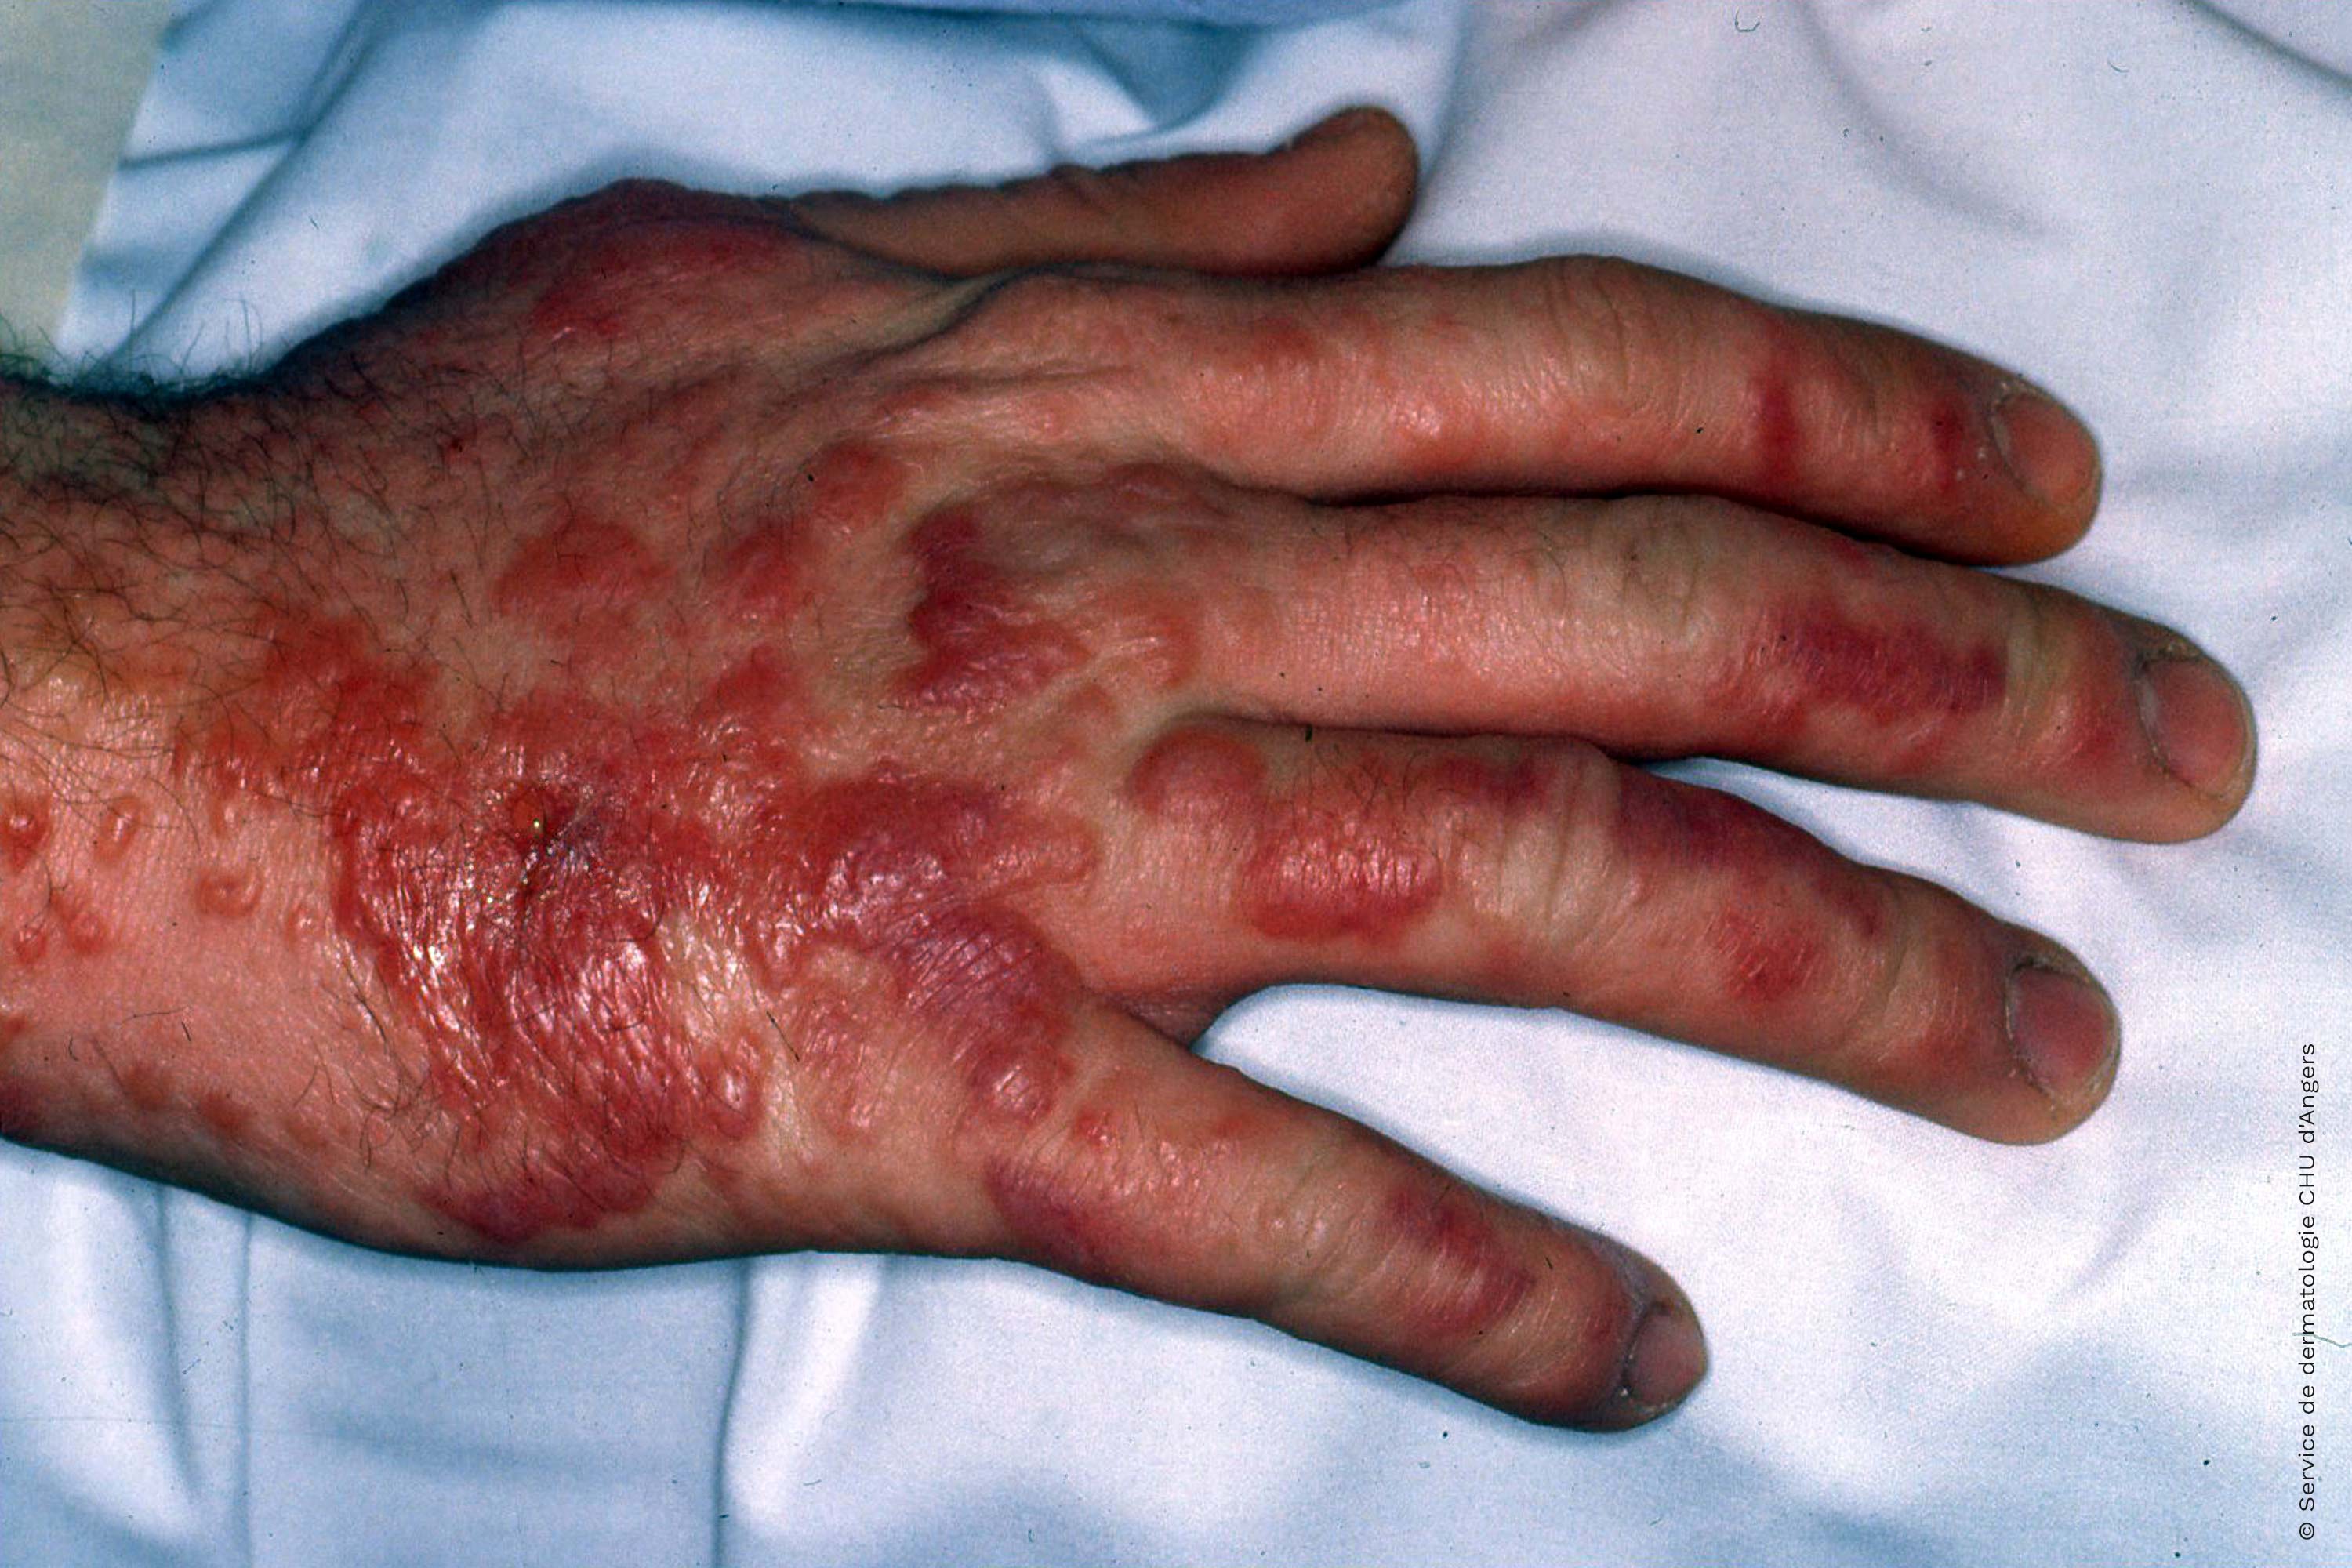 Bubbling allergic contact eczema of the hand due to primrose